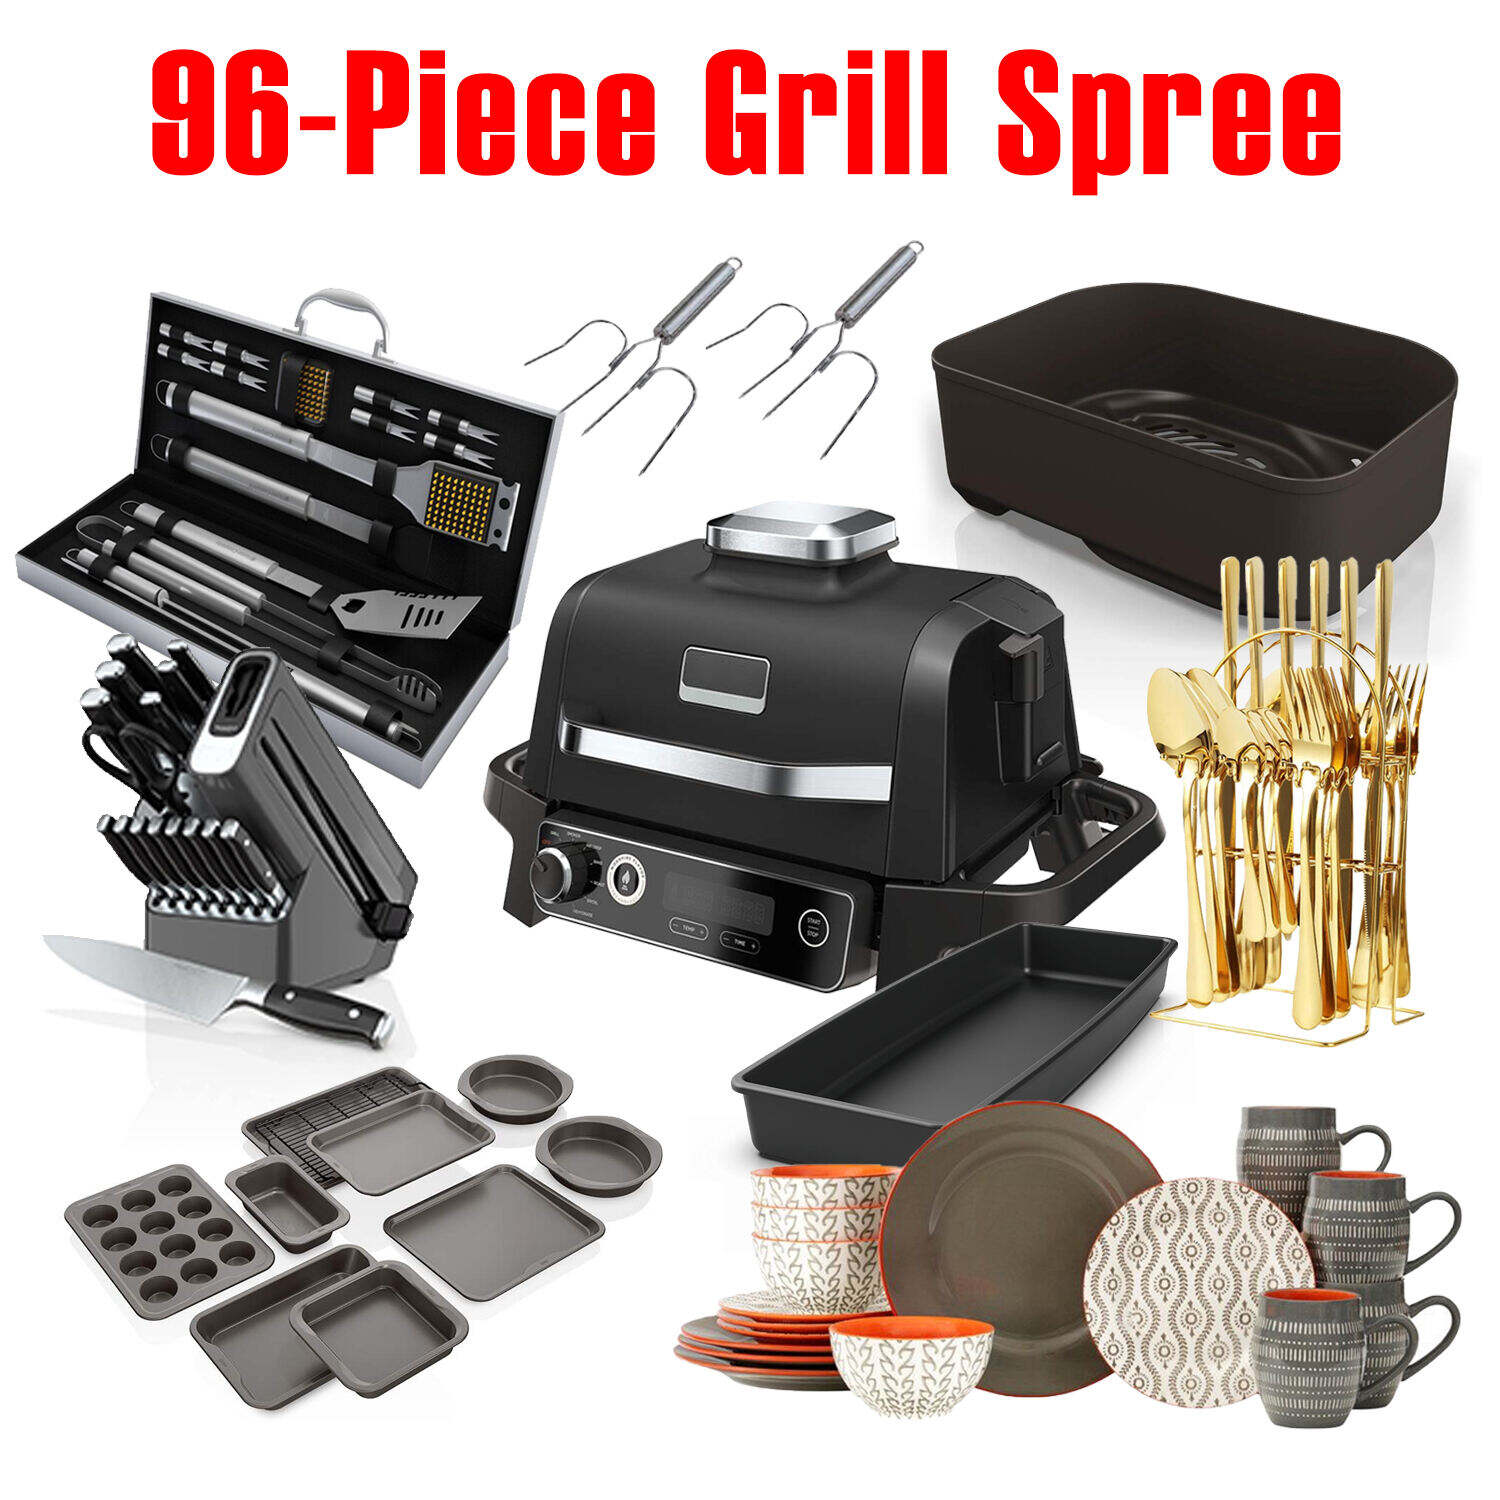 Limited-time Promotion. 96-Piece Grill Spree. Meeting All The Needs Of The Grill